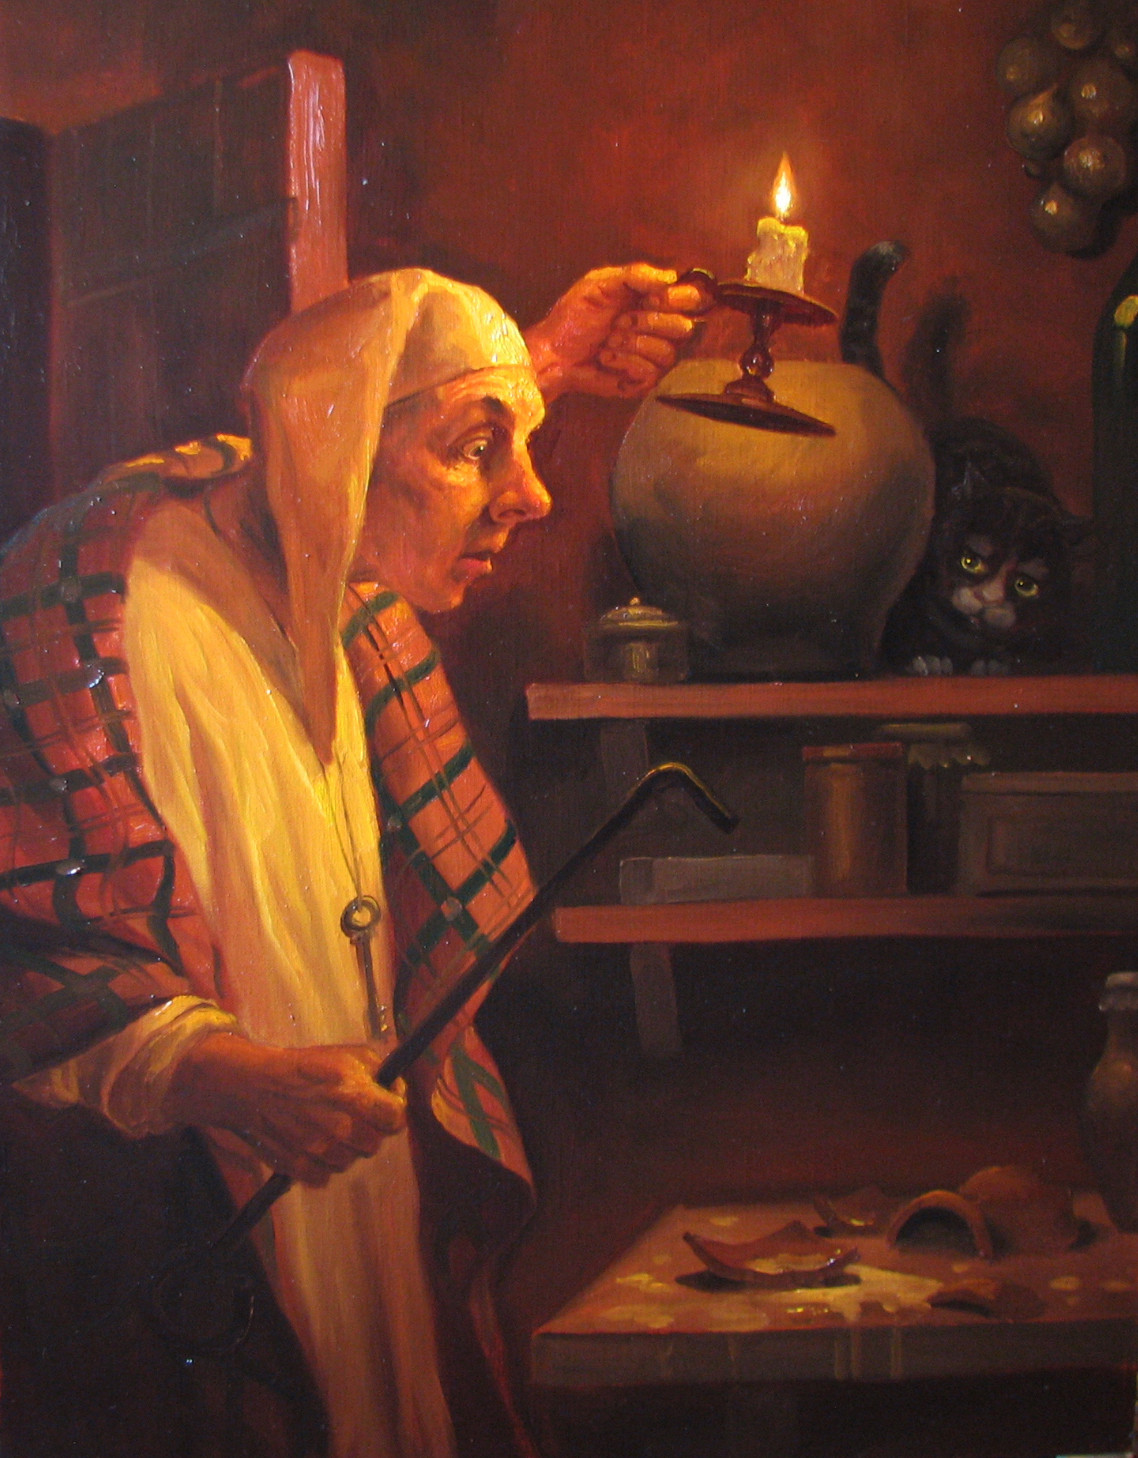 Painting by Andrey Shishkin of a man finding chards in the kitchen at night by Andrey Shishkin